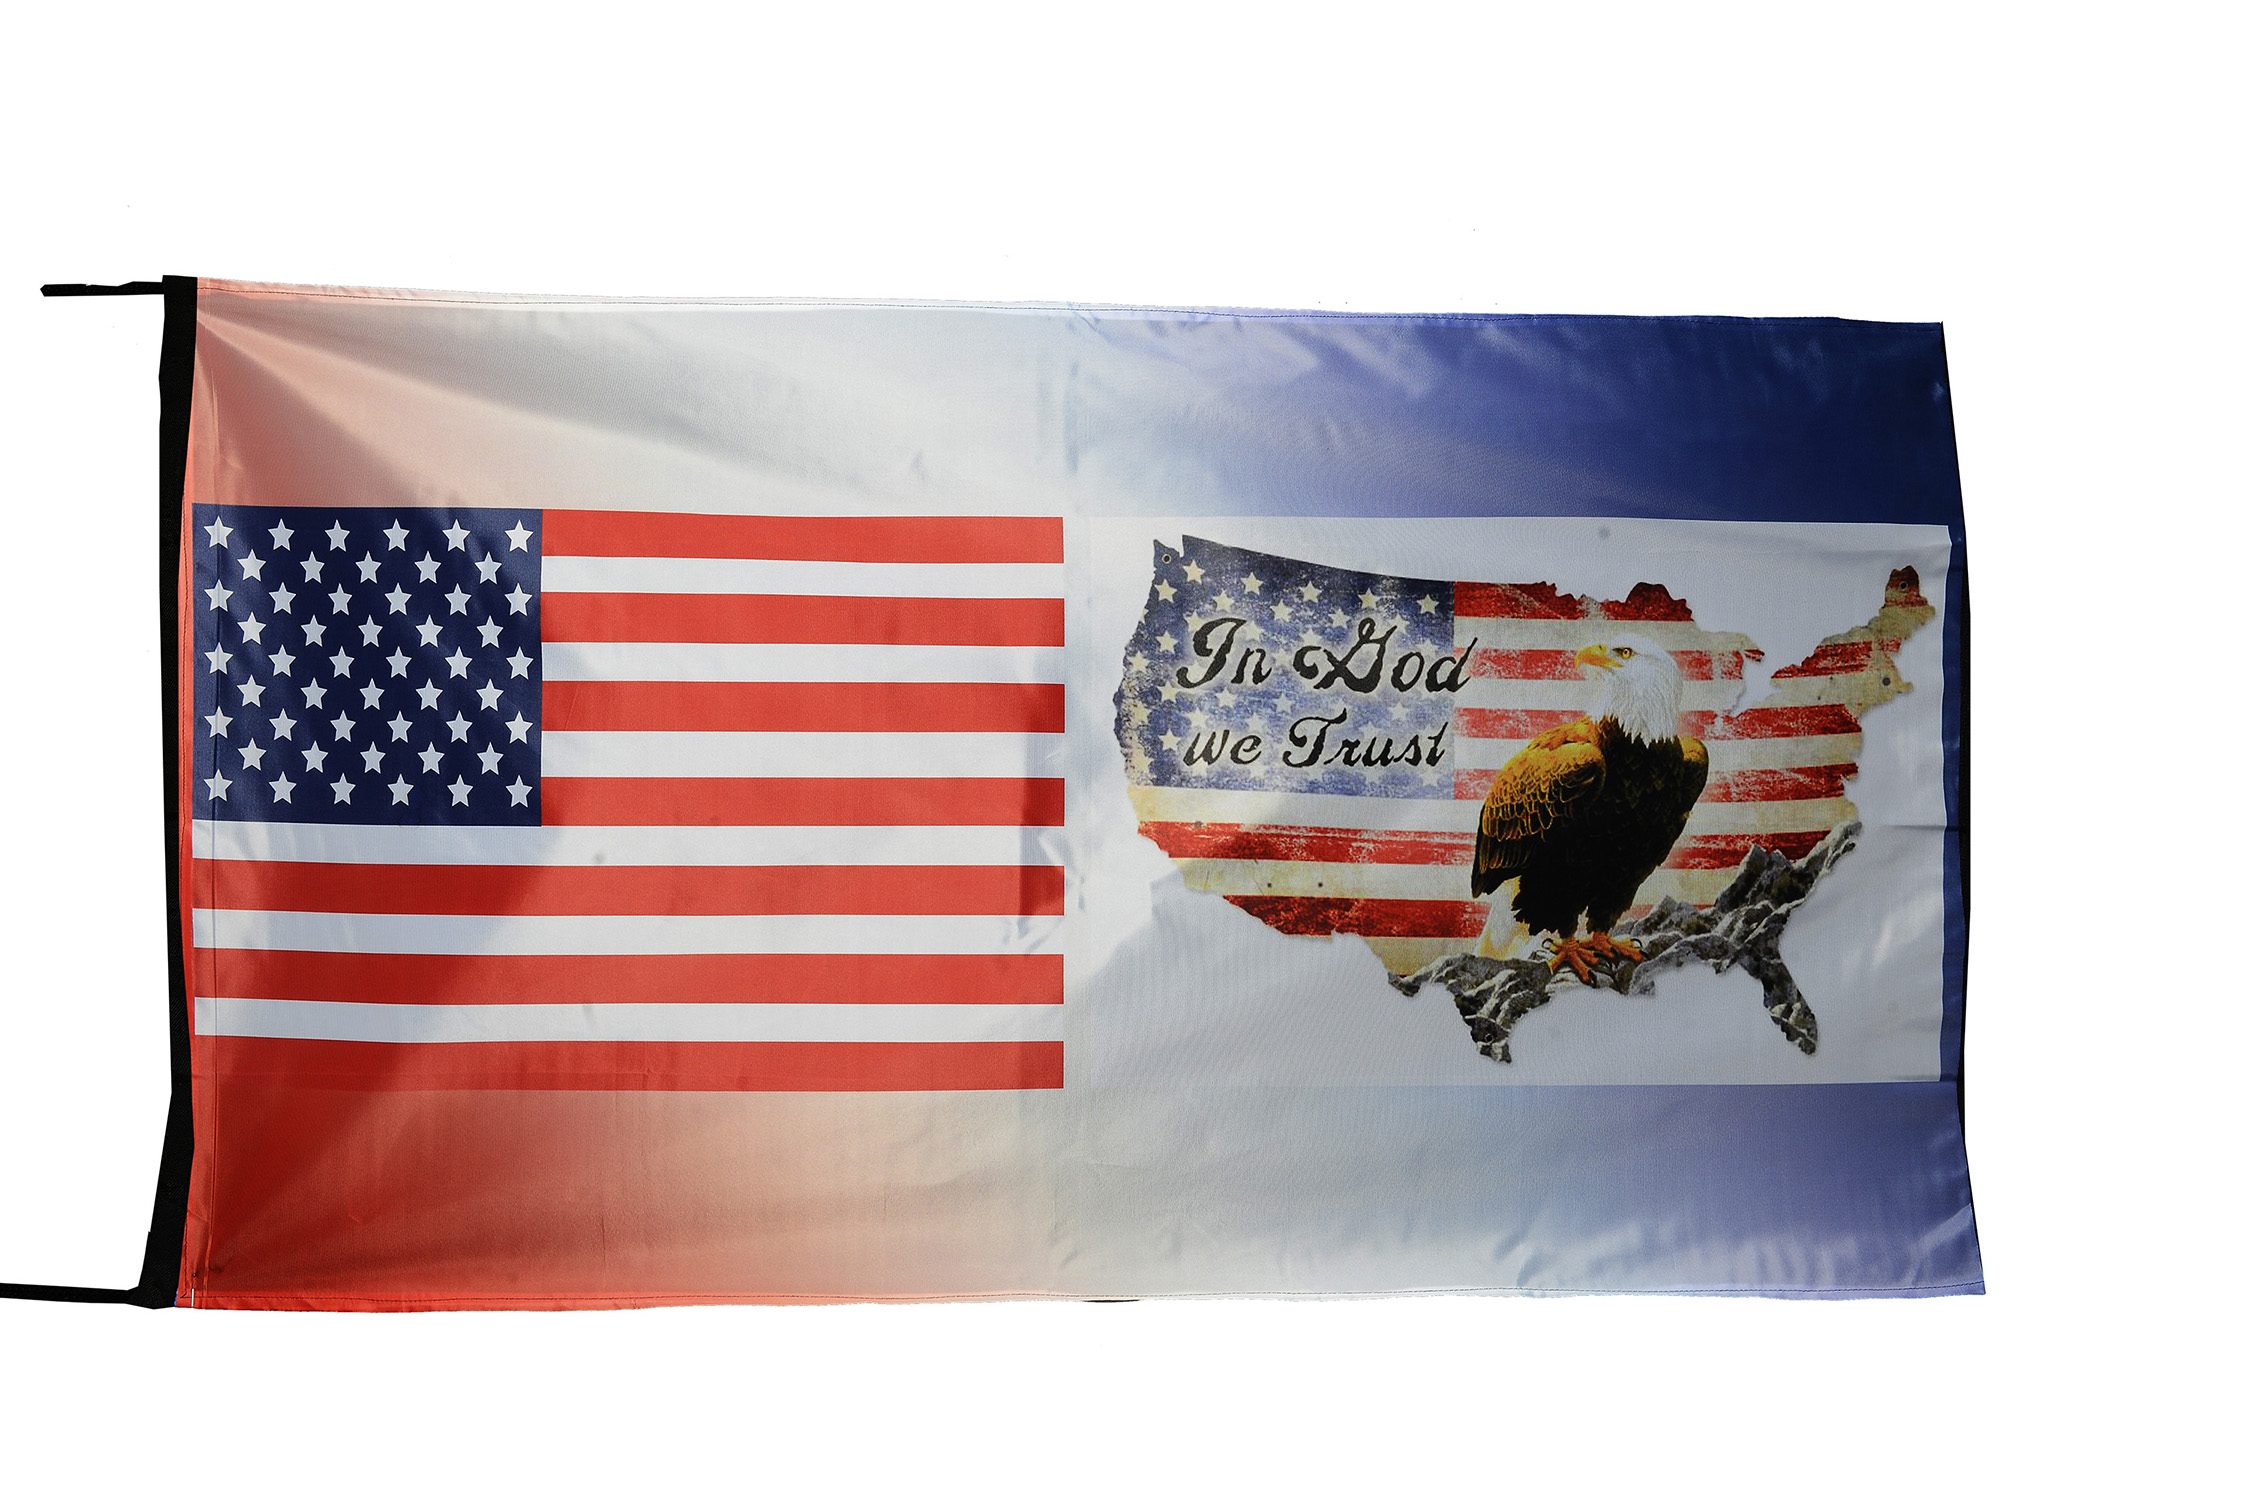 Flag  163 USA / US Country / United States Of America and We Are The People 1776 Betsy Ross / Patriotic / Pride Hybrid Weather-Resistant Polyester Outdoor Flag Landscape Banner / Vivid Colors / 3 X 5 FT (150 x 90cm) International Flags for Sale